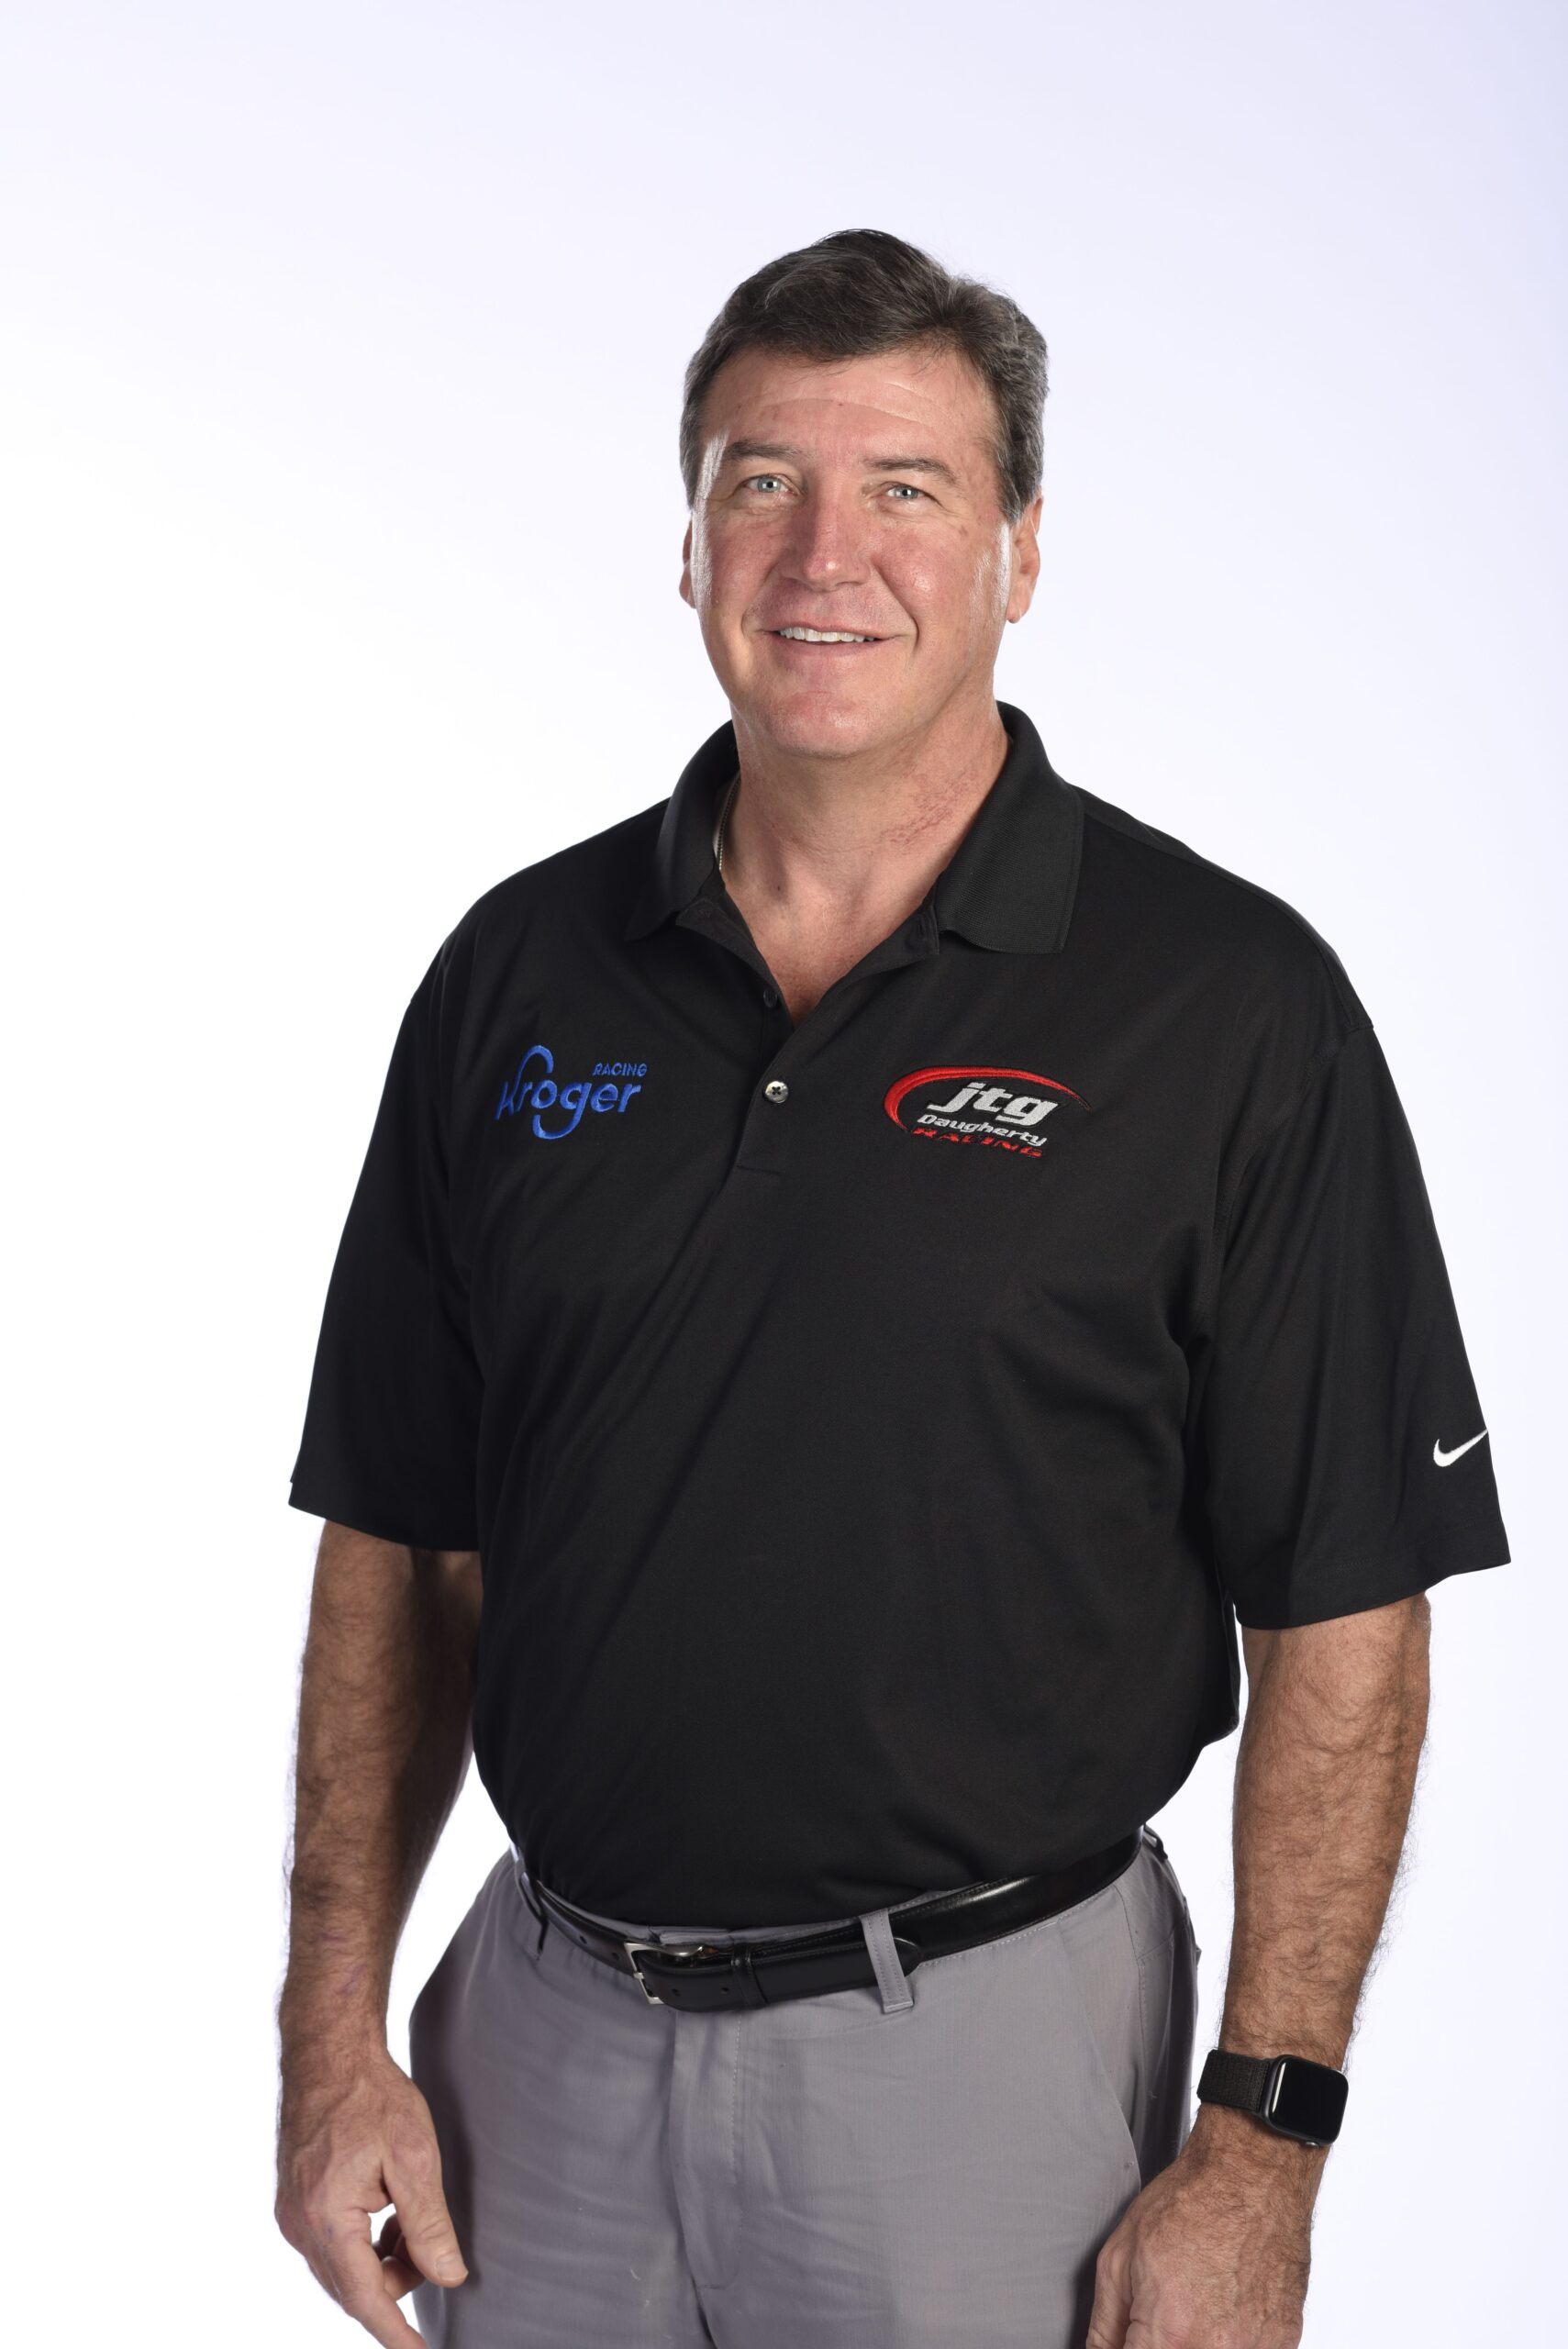 By all means, Tad Geschickter and his JTG Daugherty Racing teams remain as competitive, staying powers in NASCAR. (Photo: JTG Daugherty Racing)